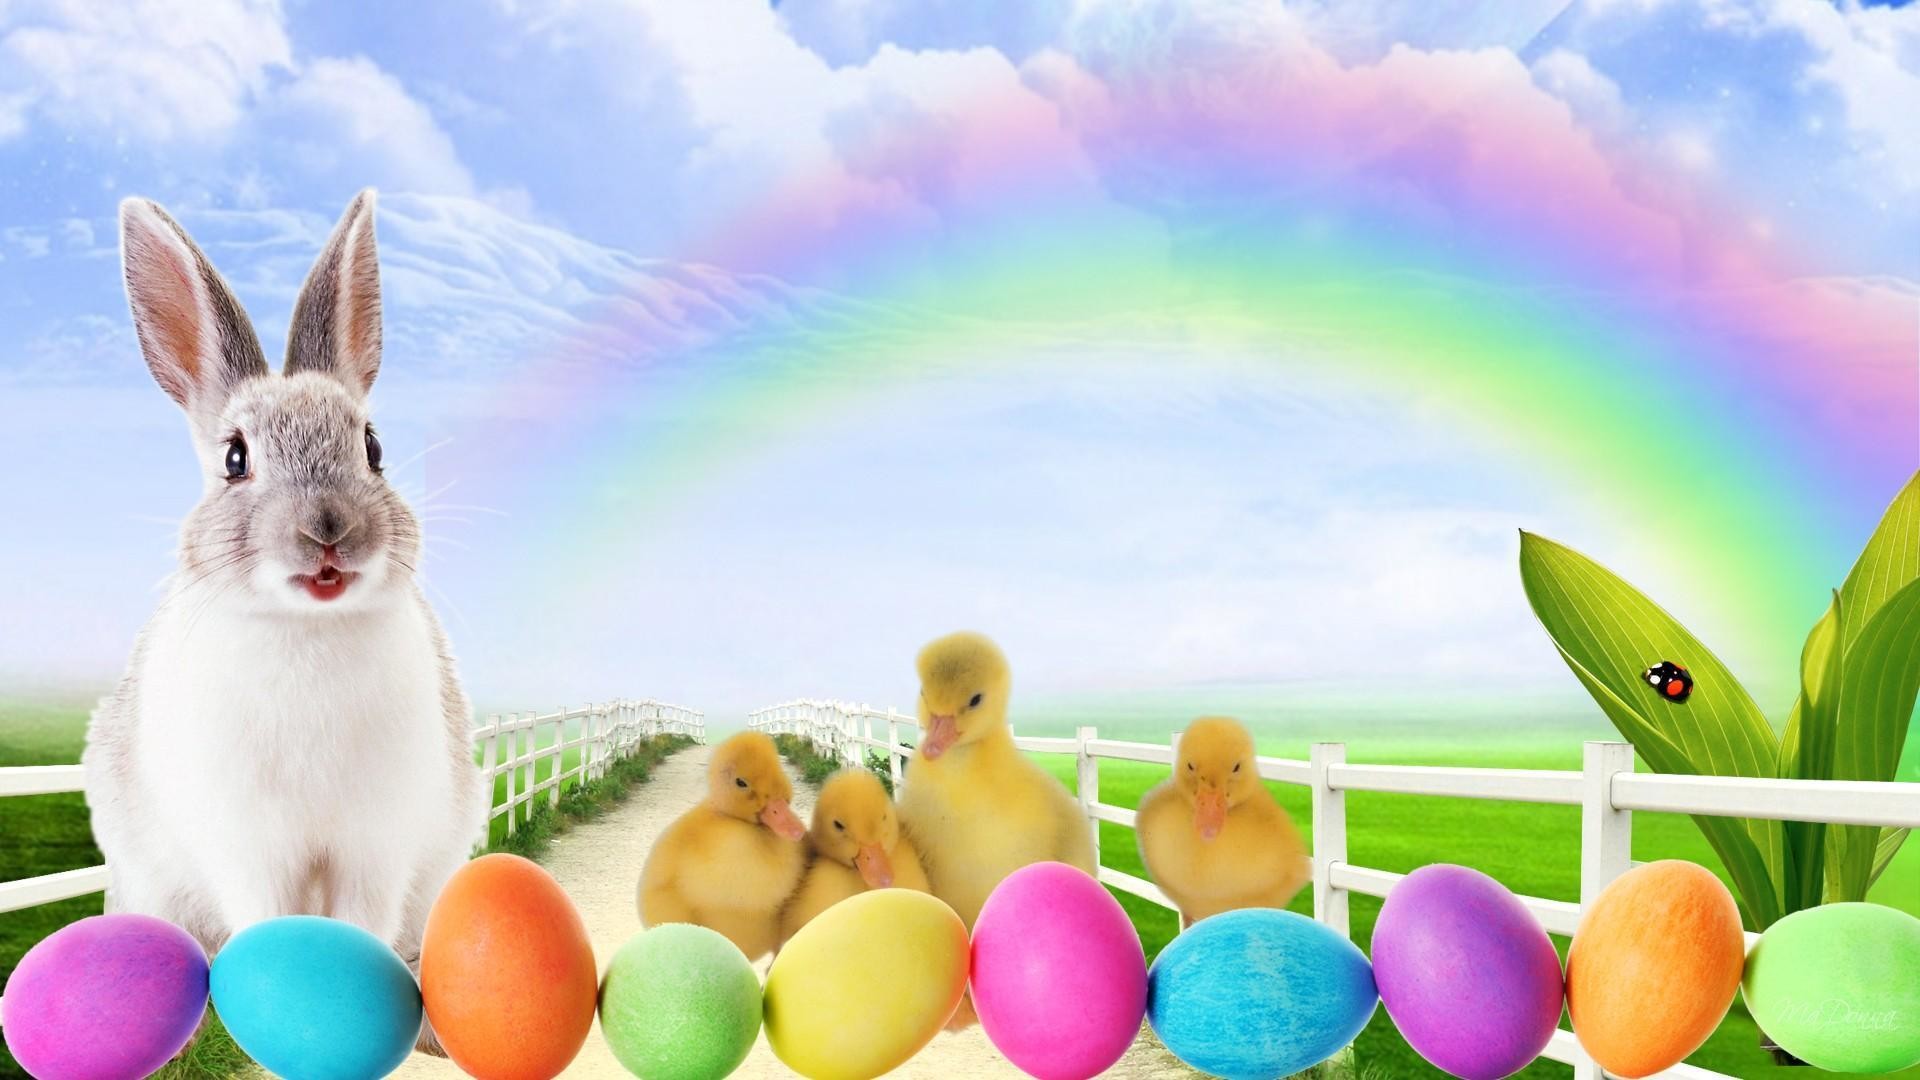 1920x1080 4608x2880 Free Easter Wallpapers For Computer - Wallpaper Cave